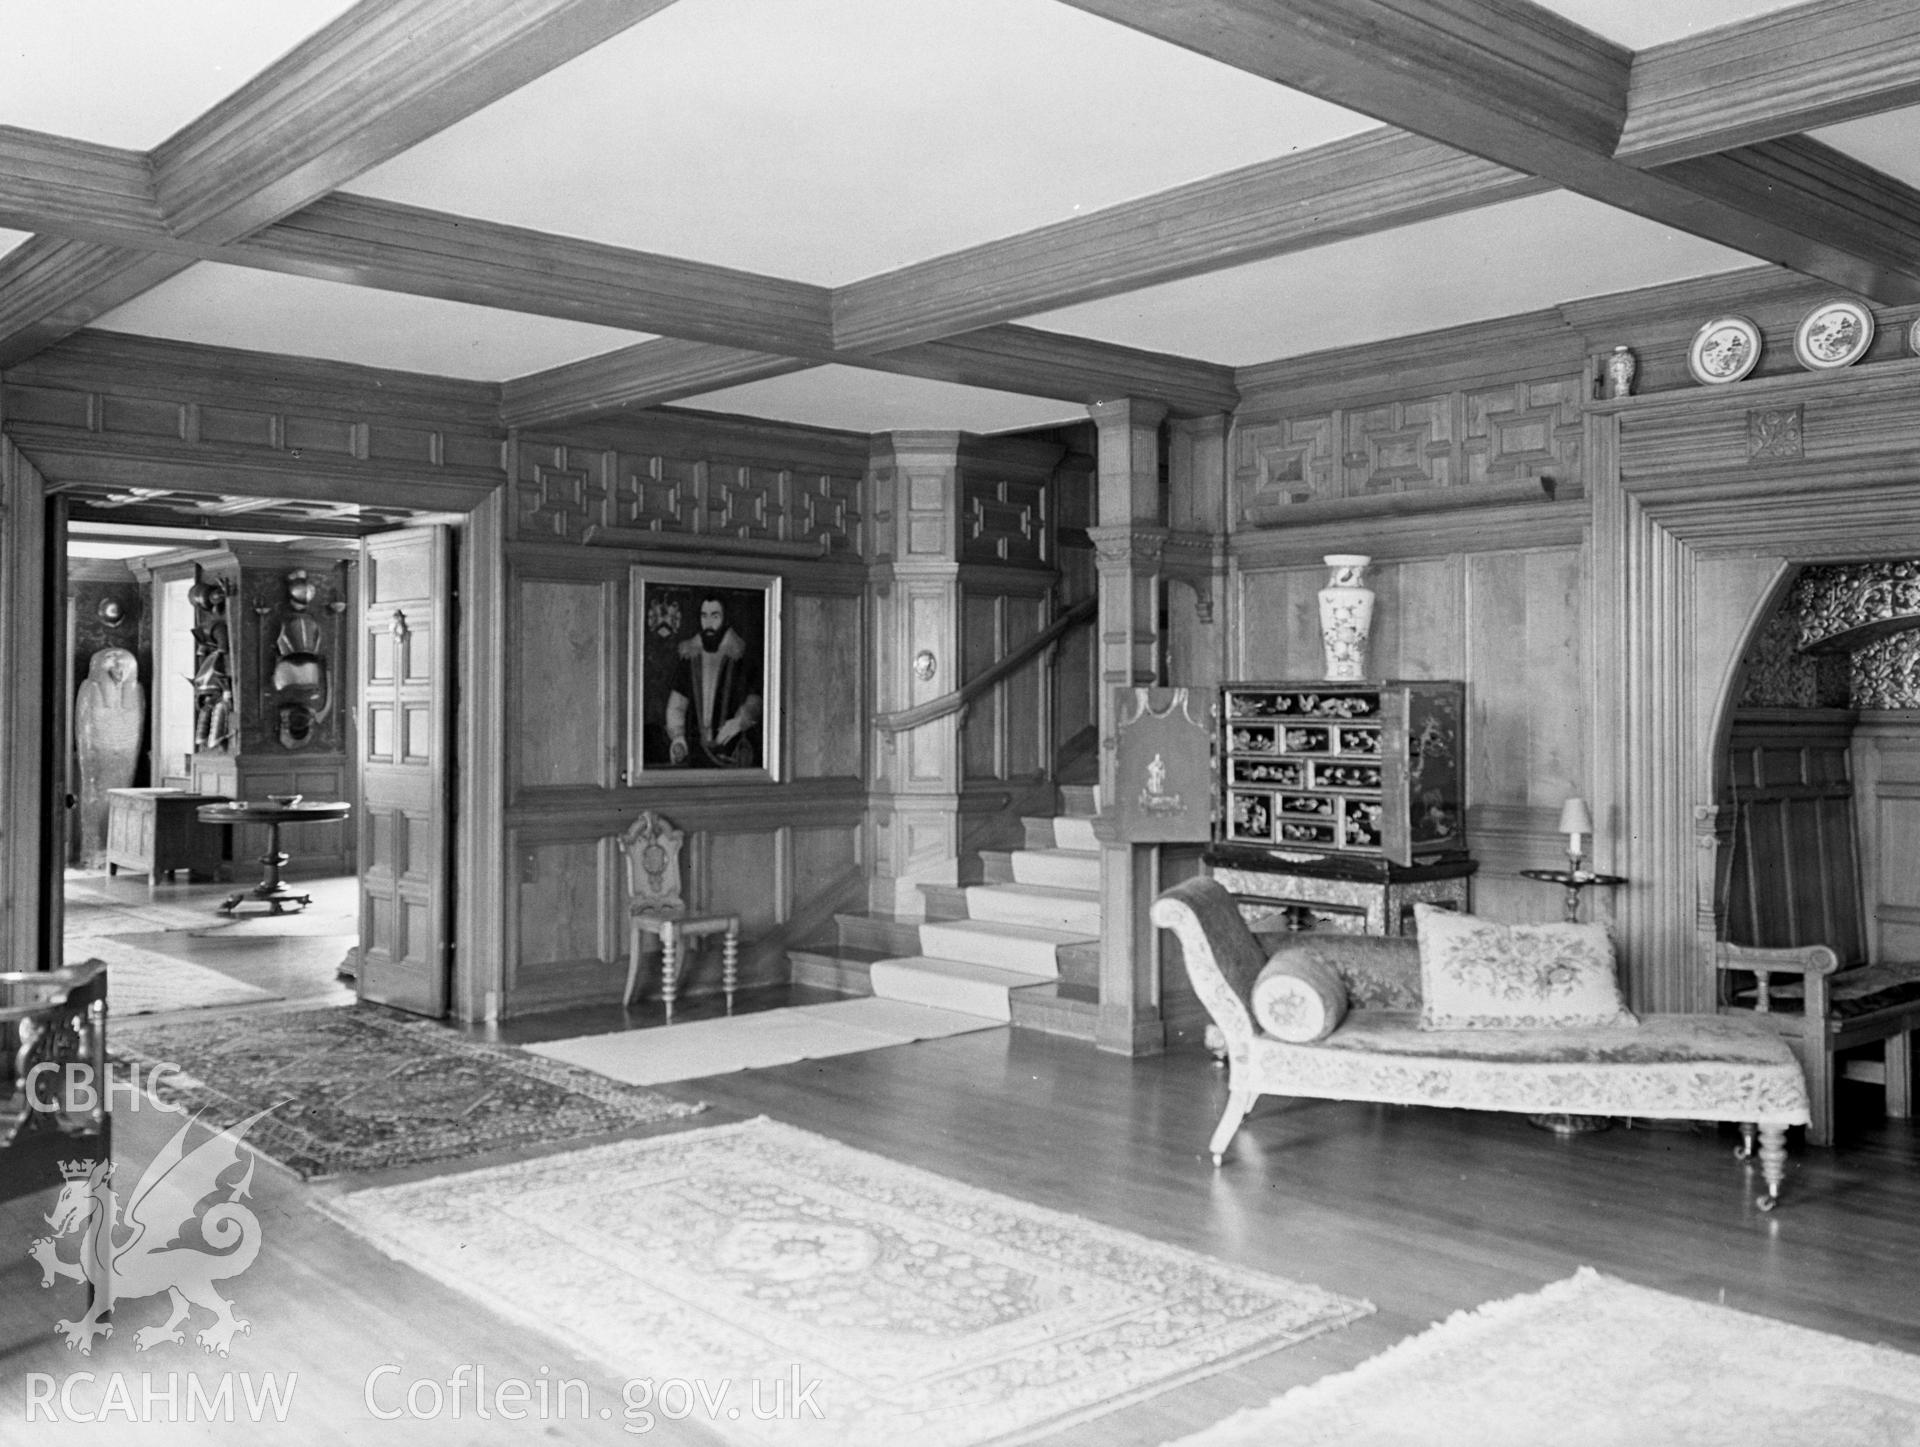 The west entrance of the Hall. With a moulded beam ceiling, wood panelled walls and a wooden floor.